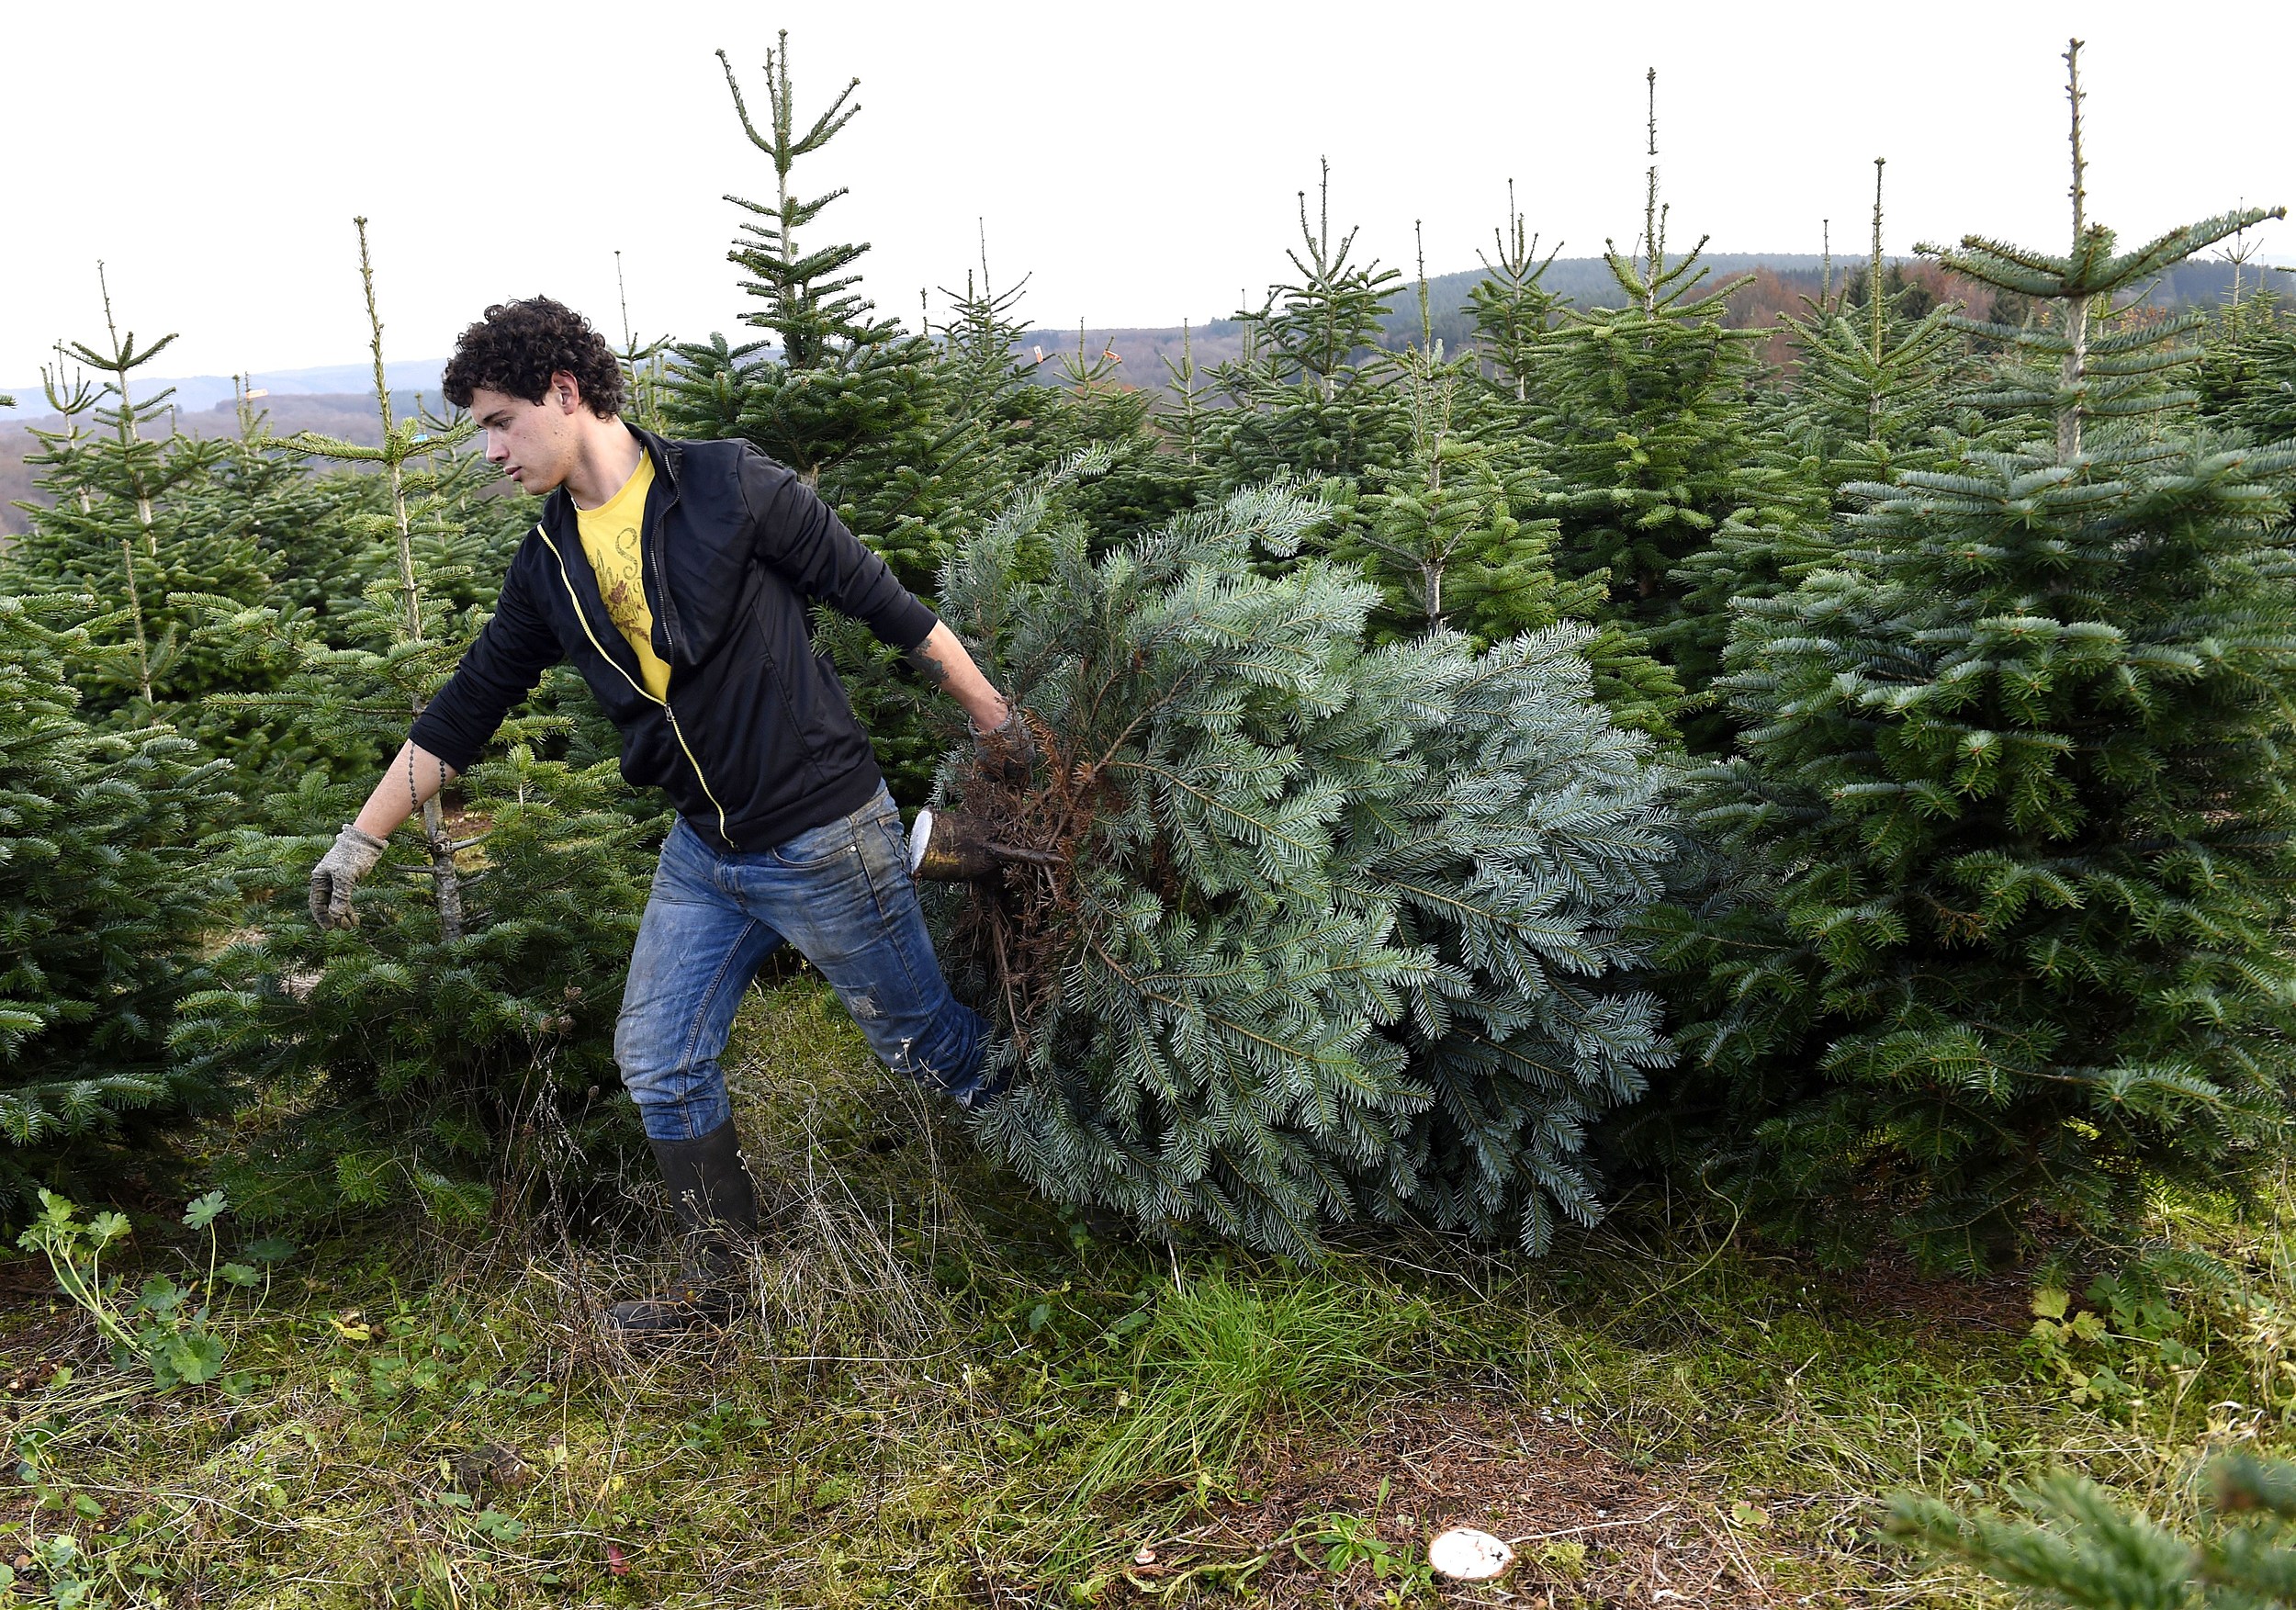 List Of Places You Can Chop Your Own Christmas Tree Down Around Buffalo, NY